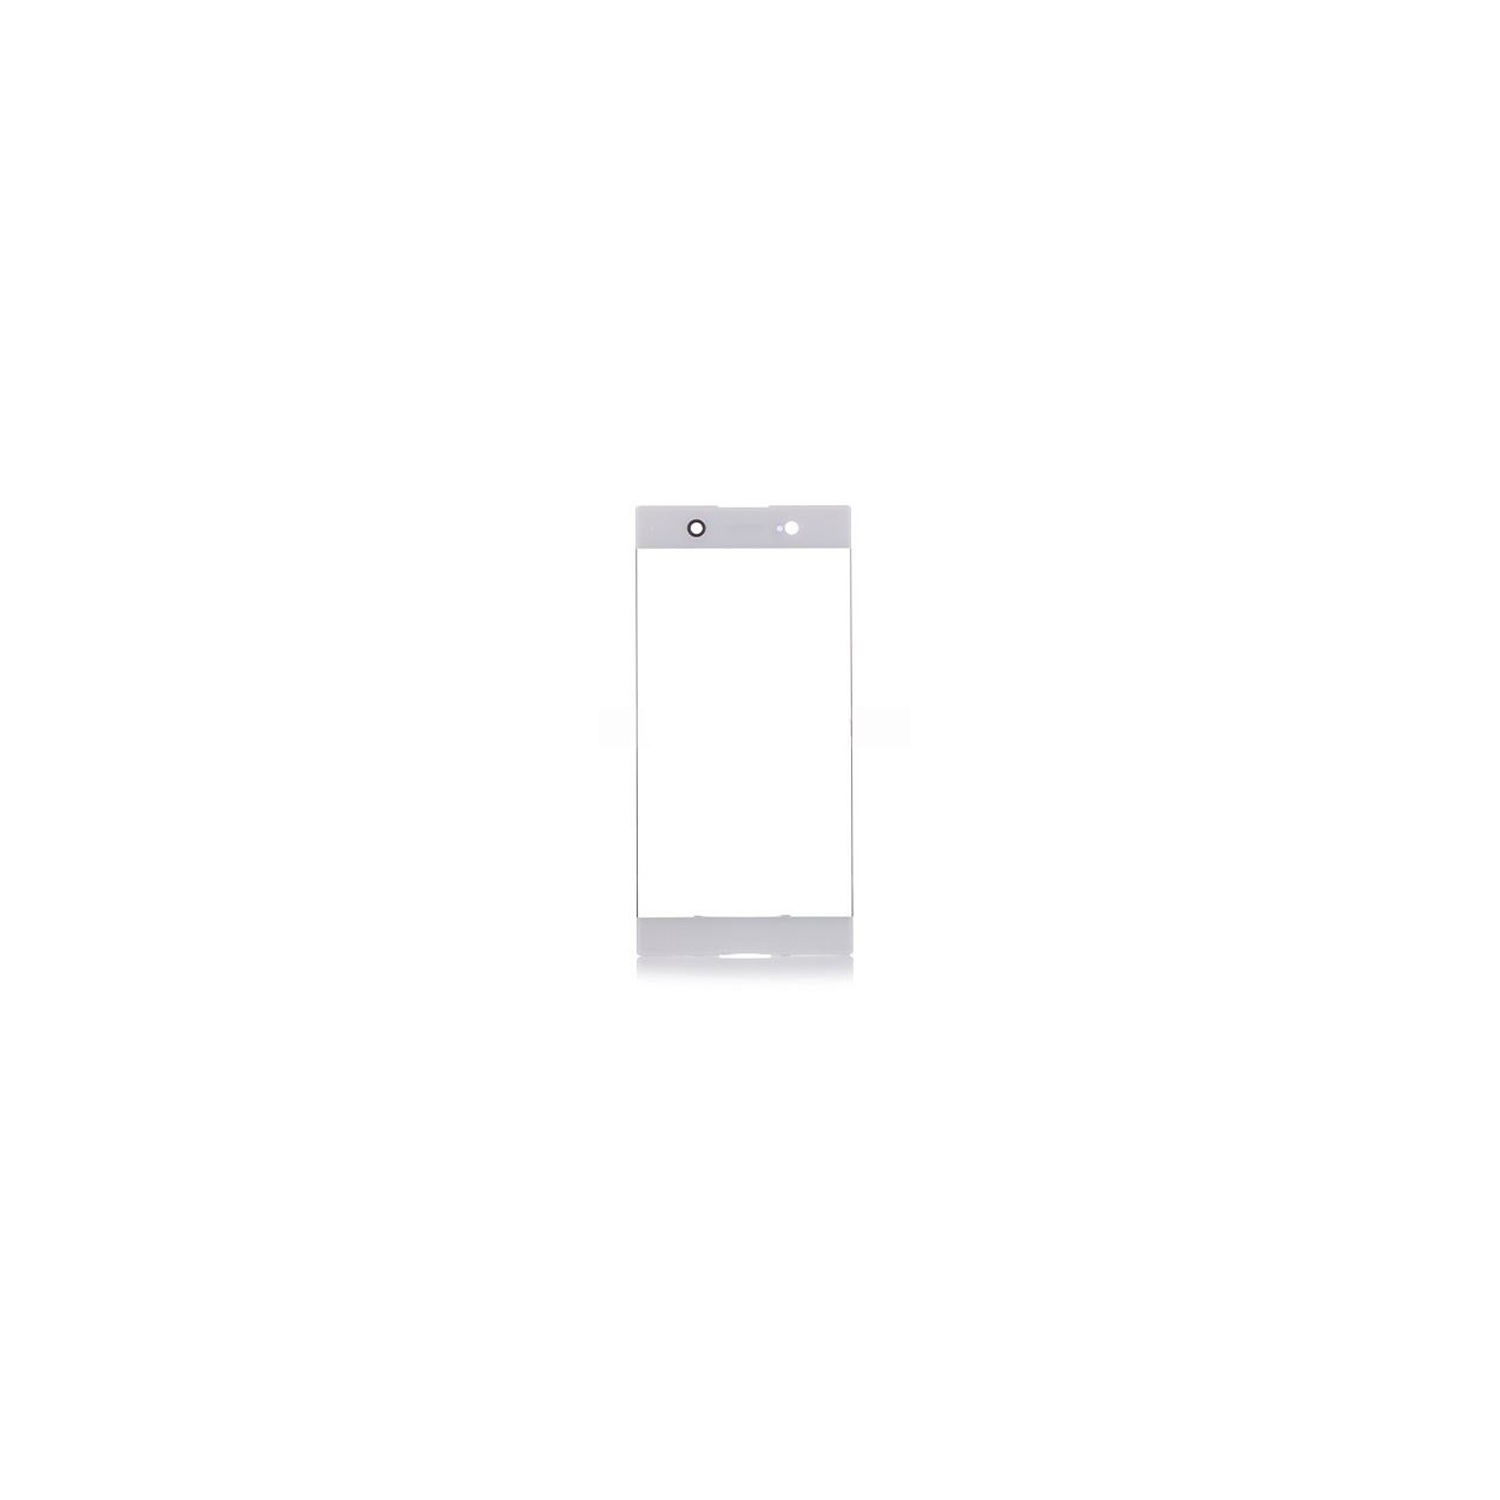 Sony Xperia XA1 Ultra G3223 Front Glass Top Glass Replacement - White